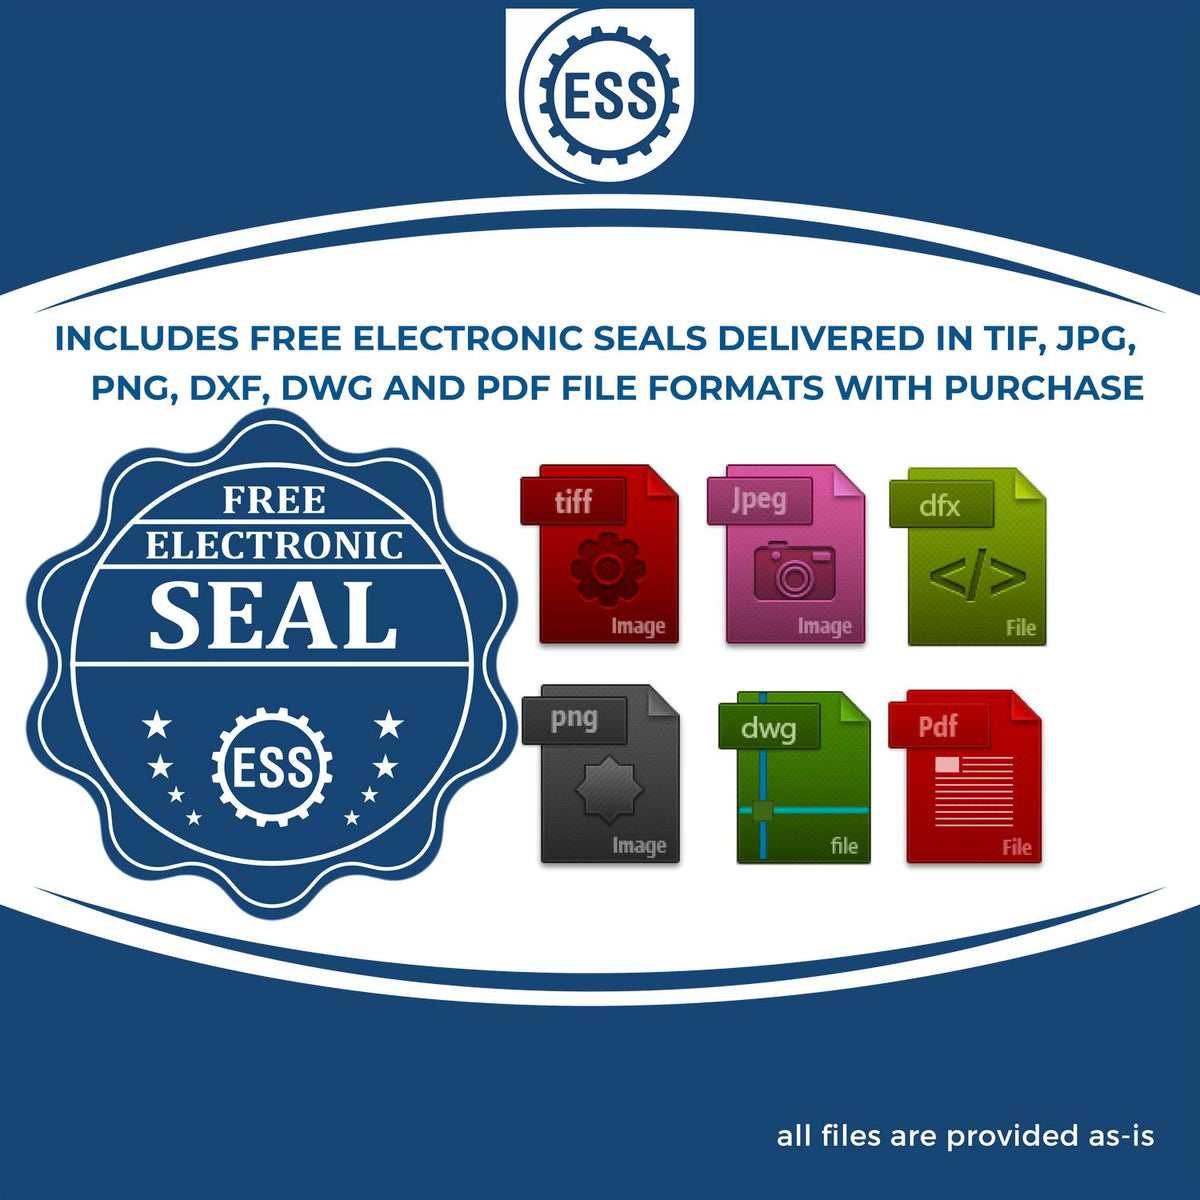 An infographic for the free electronic seal for the Heavy Duty Cast Iron Hawaii Engineer Seal Embosser illustrating the different file type icons such as DXF, DWG, TIF, JPG and PNG.